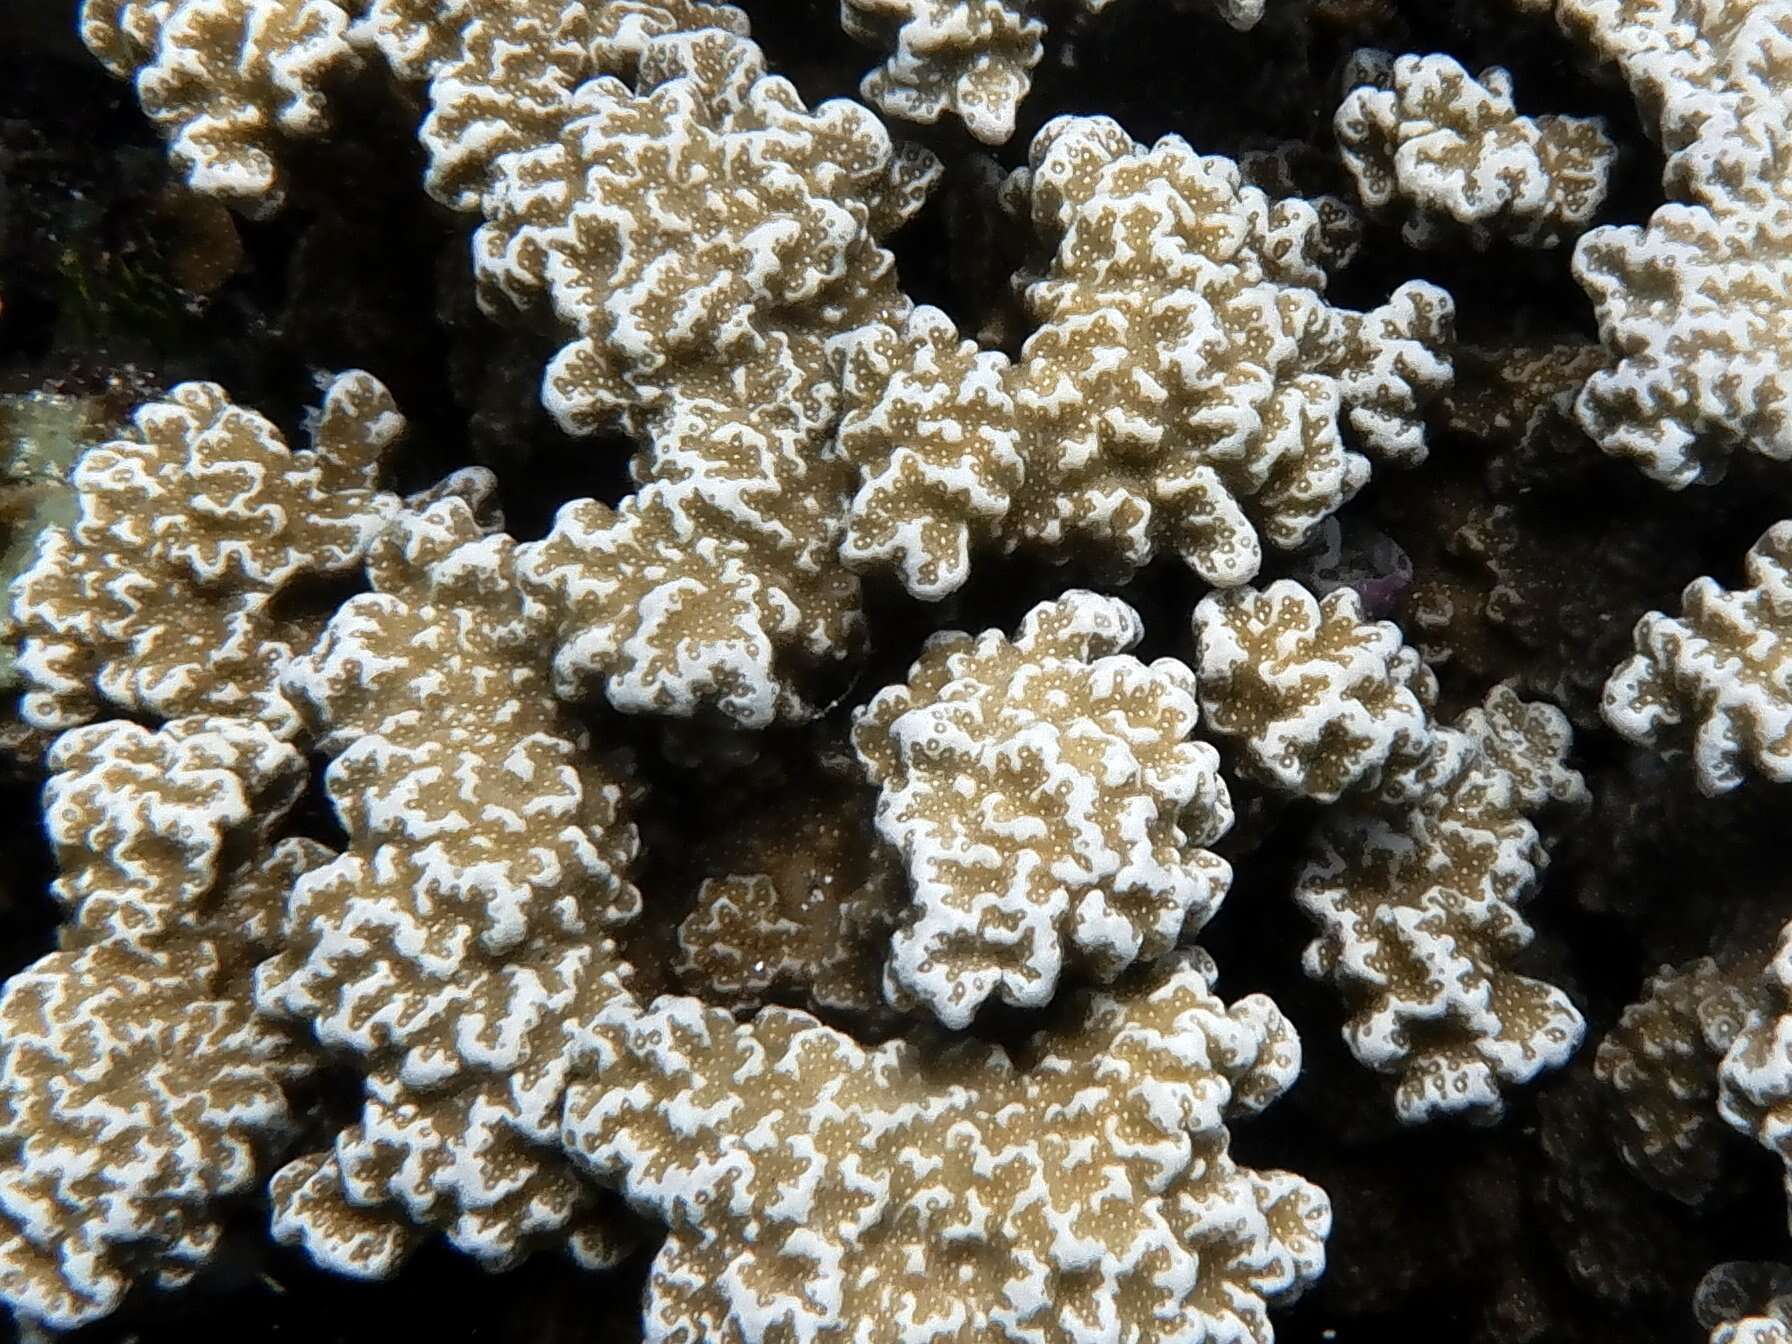 Image of Column coral